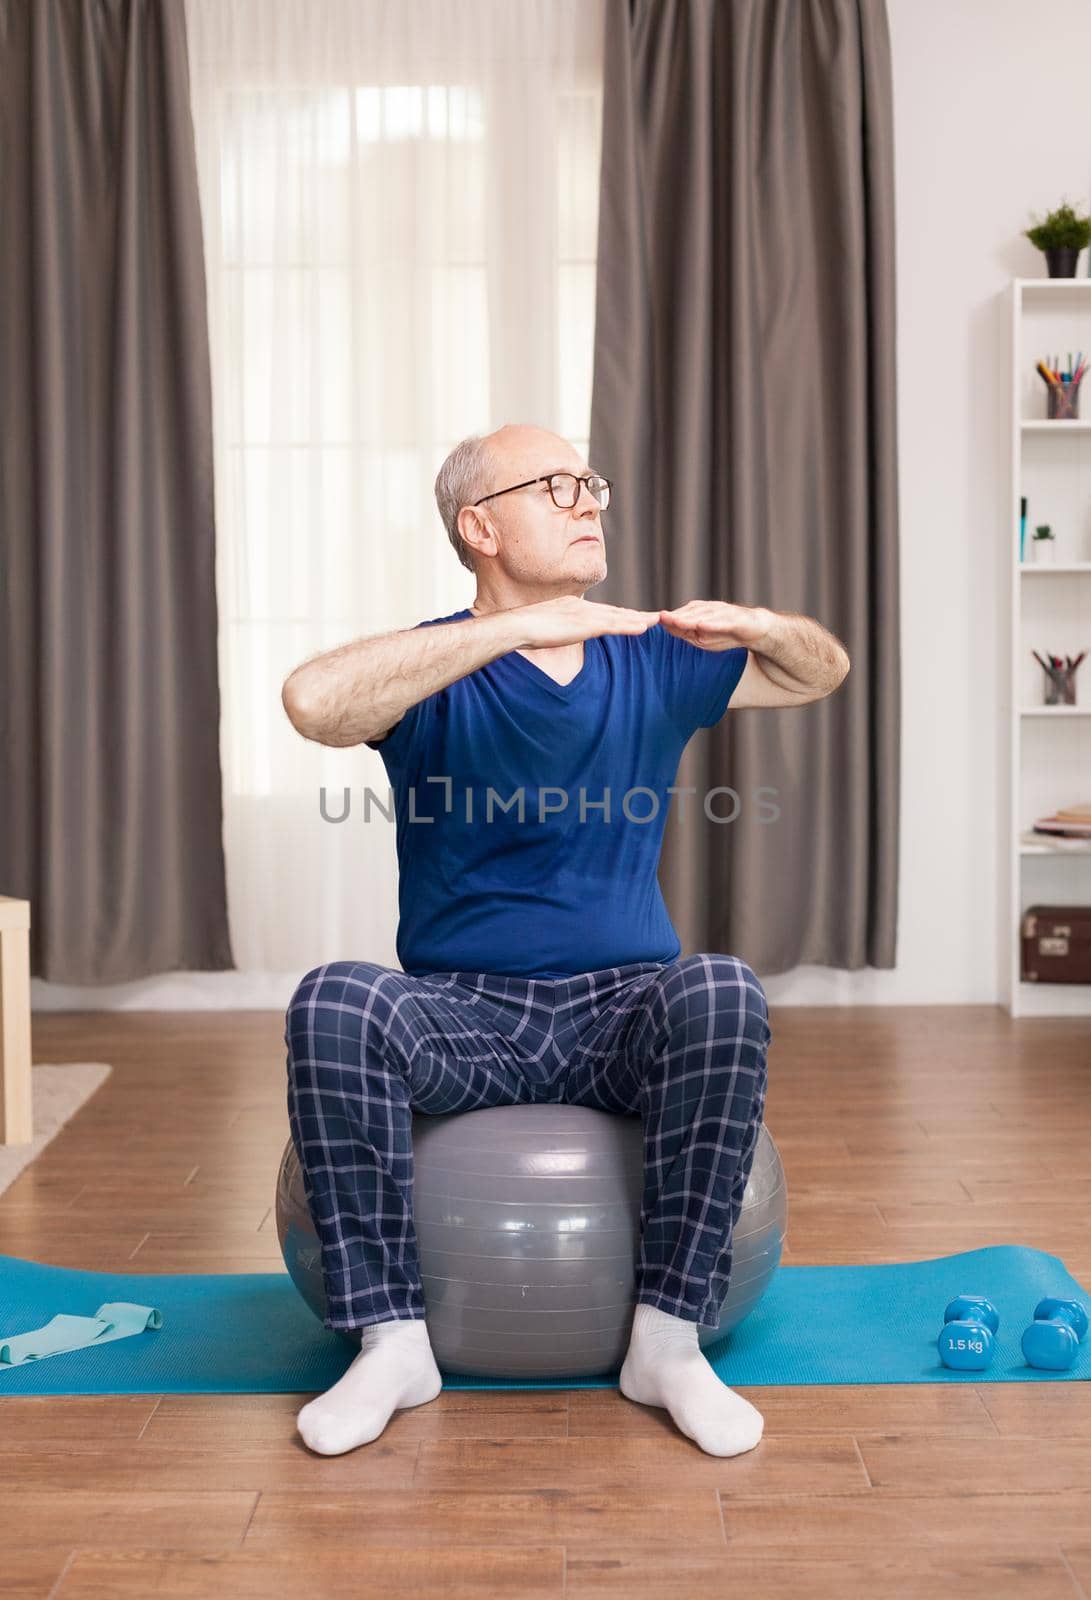 Retired man with healthy lifestyle doing arms exercises. Old person pensioner online internet exercise training at home sport activity with dumbbell, resistance band, swiss ball at elderly retirement age.